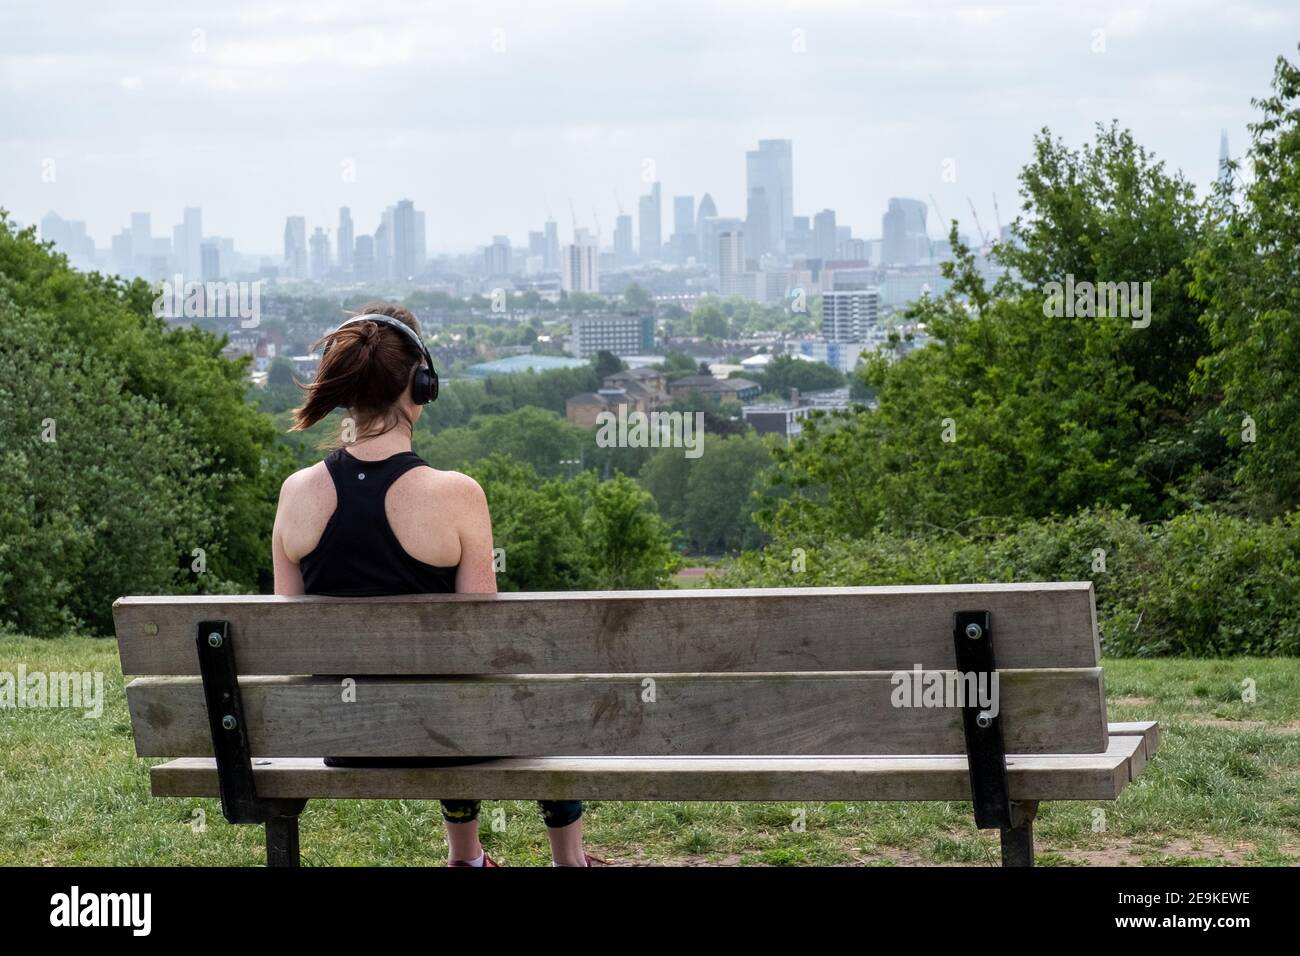 A young woman wearing athletic clothing sits on a bench looking out over the London skyline from the Parliament Hill viewpoint on Hamstead Heath Stock Photo